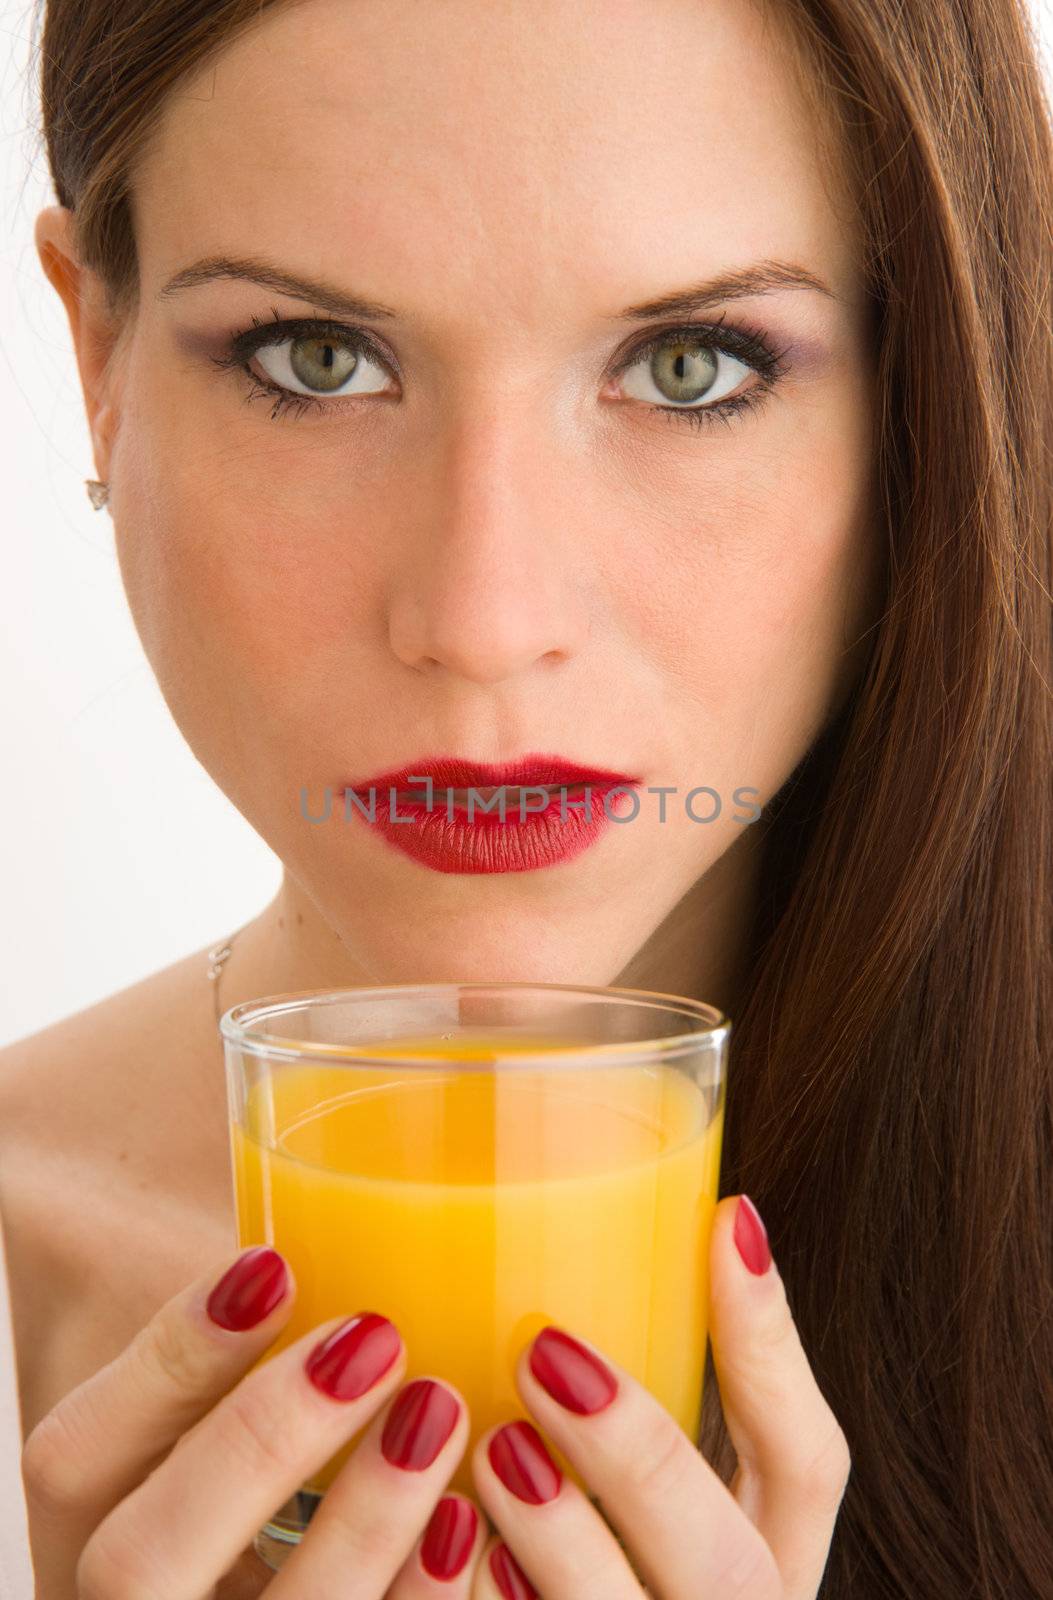 Colorful Woman's hand holds a glass of Orange Juice